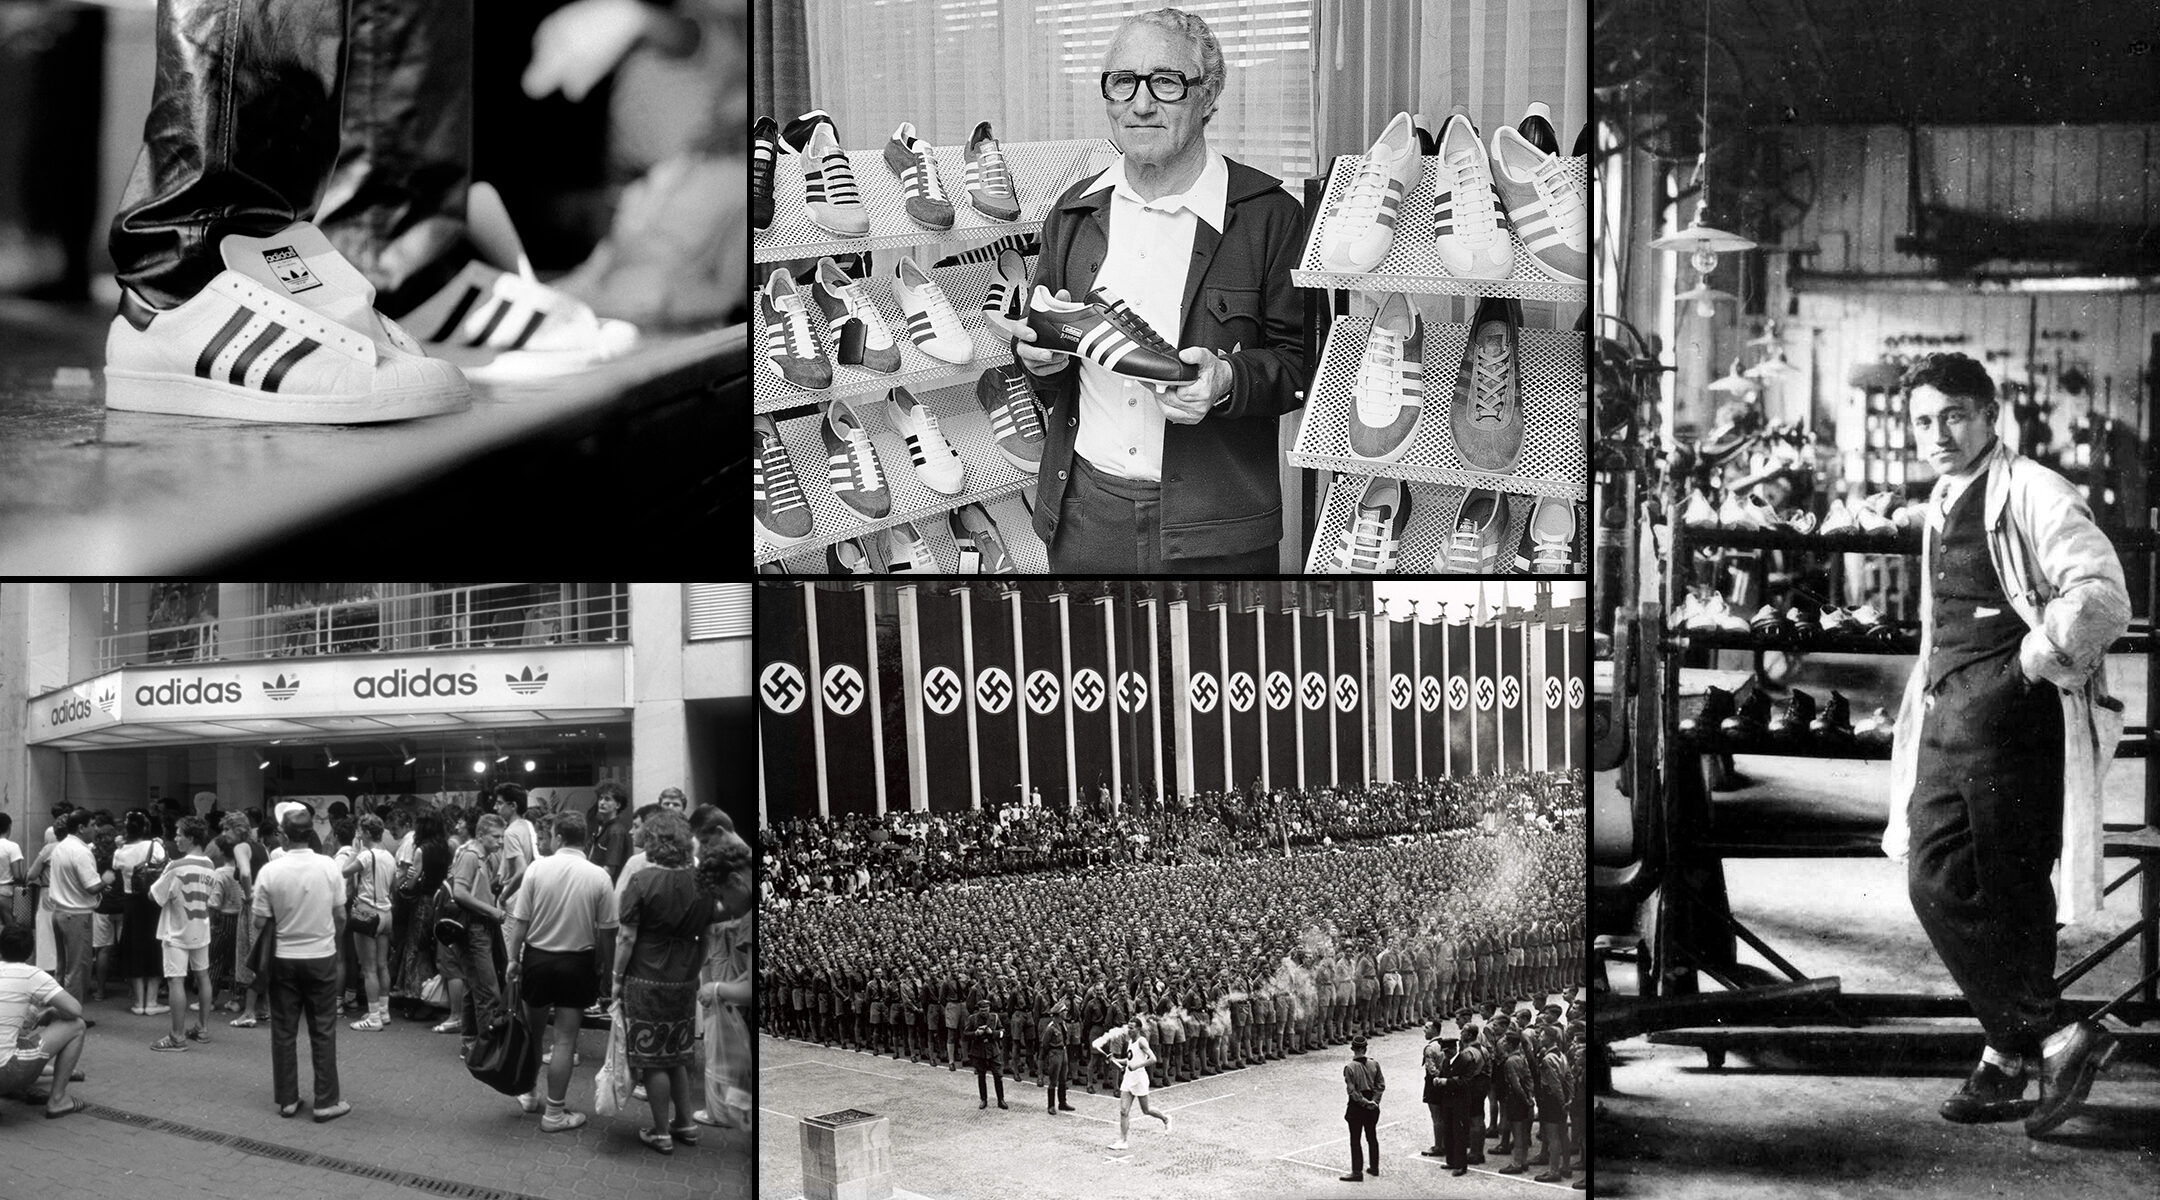 Adidas: The Emergence of a Leading Sports and Fashion Brand